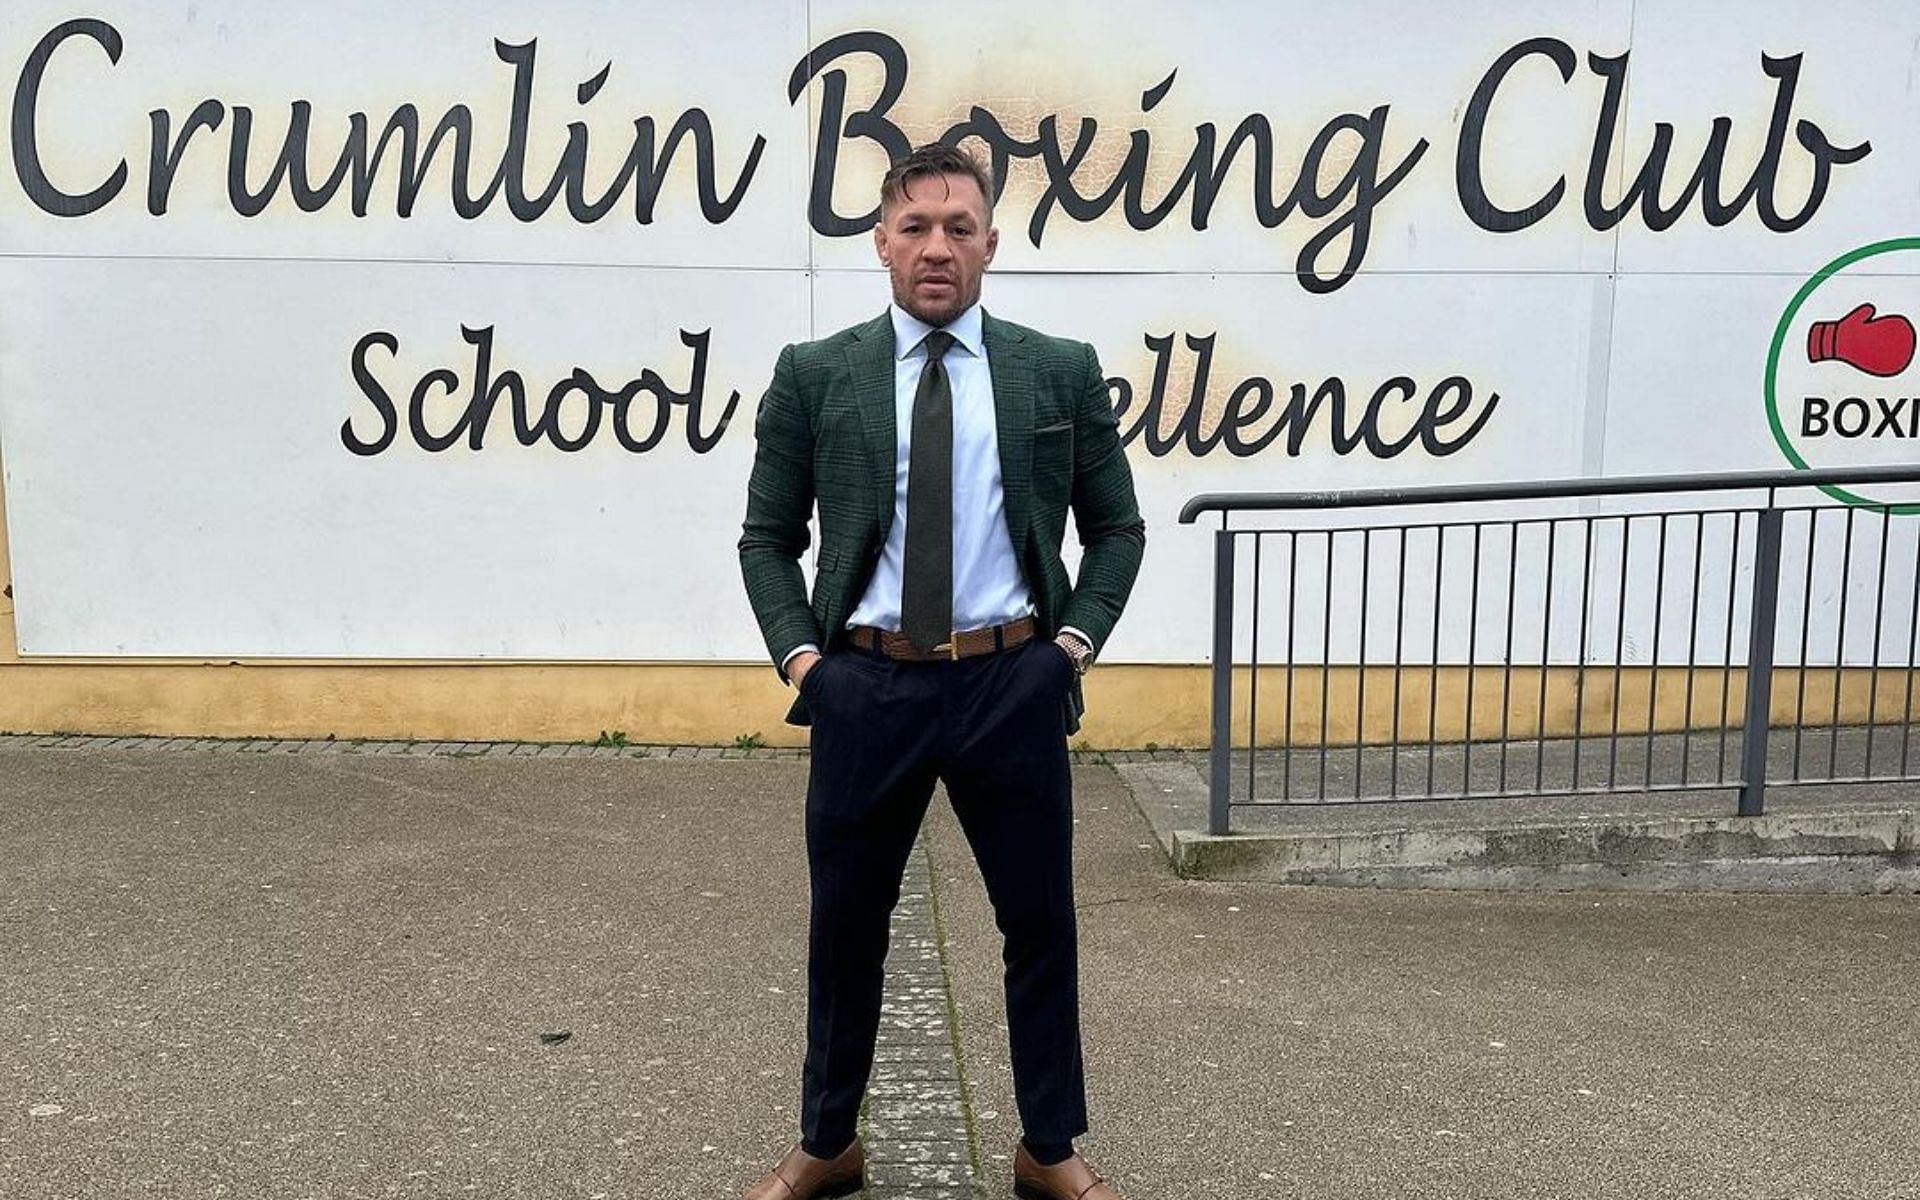 Conor McGregor outside the Crumlin Boxing Club (Image courtesy @thenotoriousmma on Instagram)